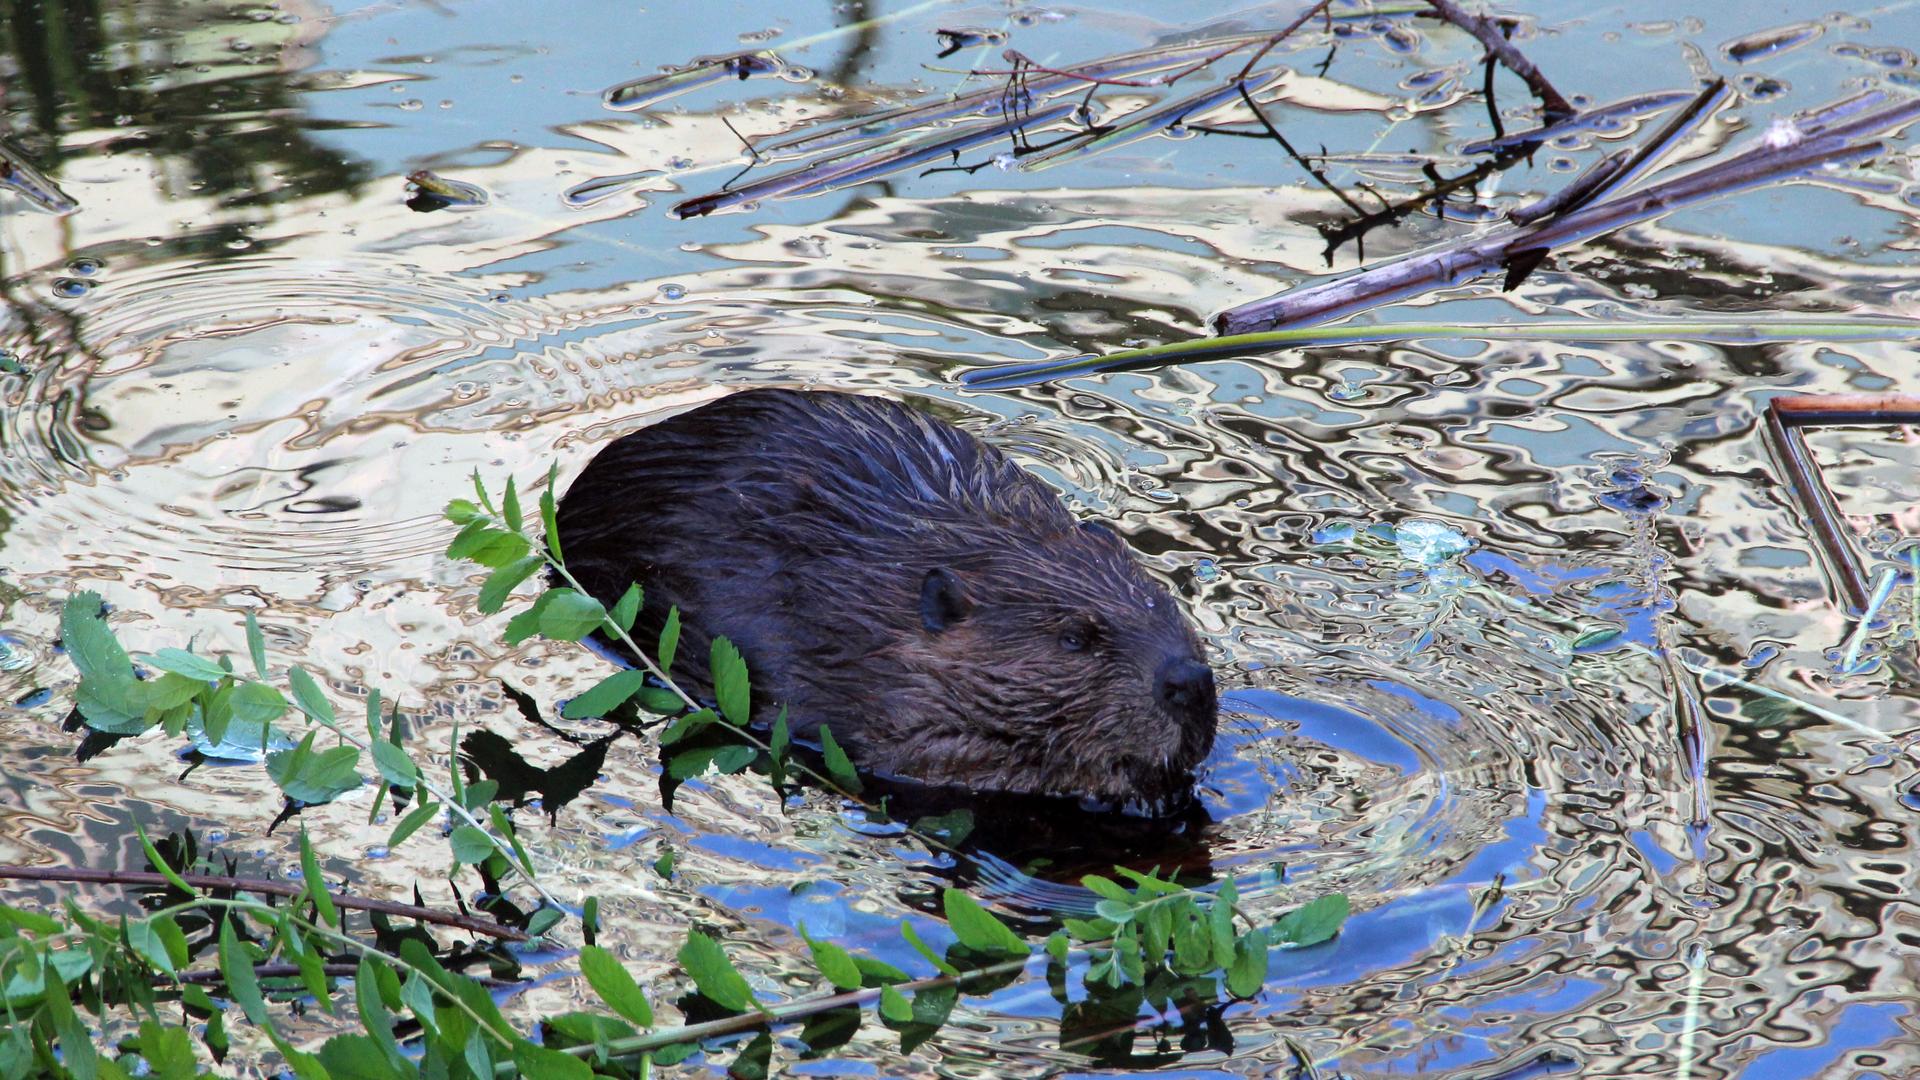 These beavers even have a Twitter account.